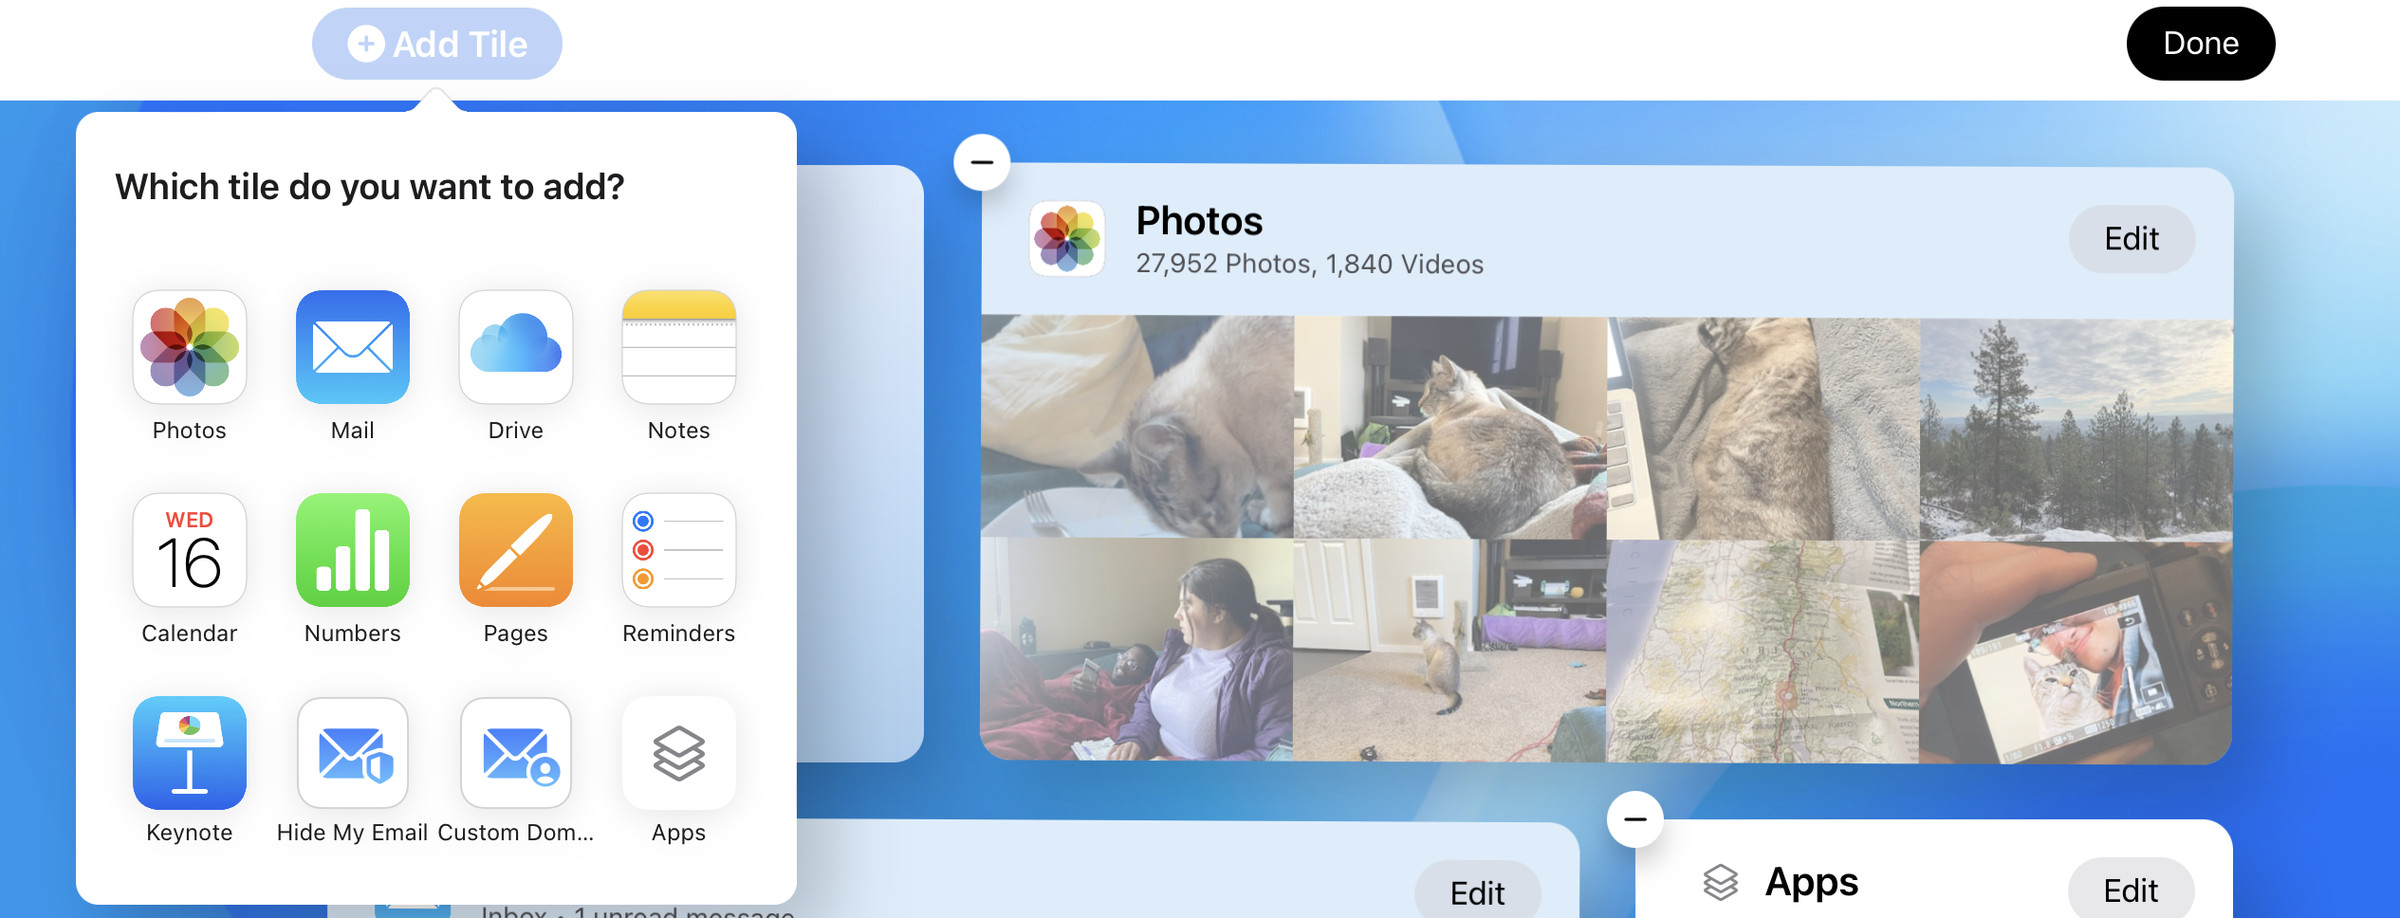 Screenshot of the customization options for the new iCloud design, giving the user the option to add a photo, mail, drive, notes, calendar, numbers, pages, reminders, keynote, hide my email, custom domain, or apps tile.